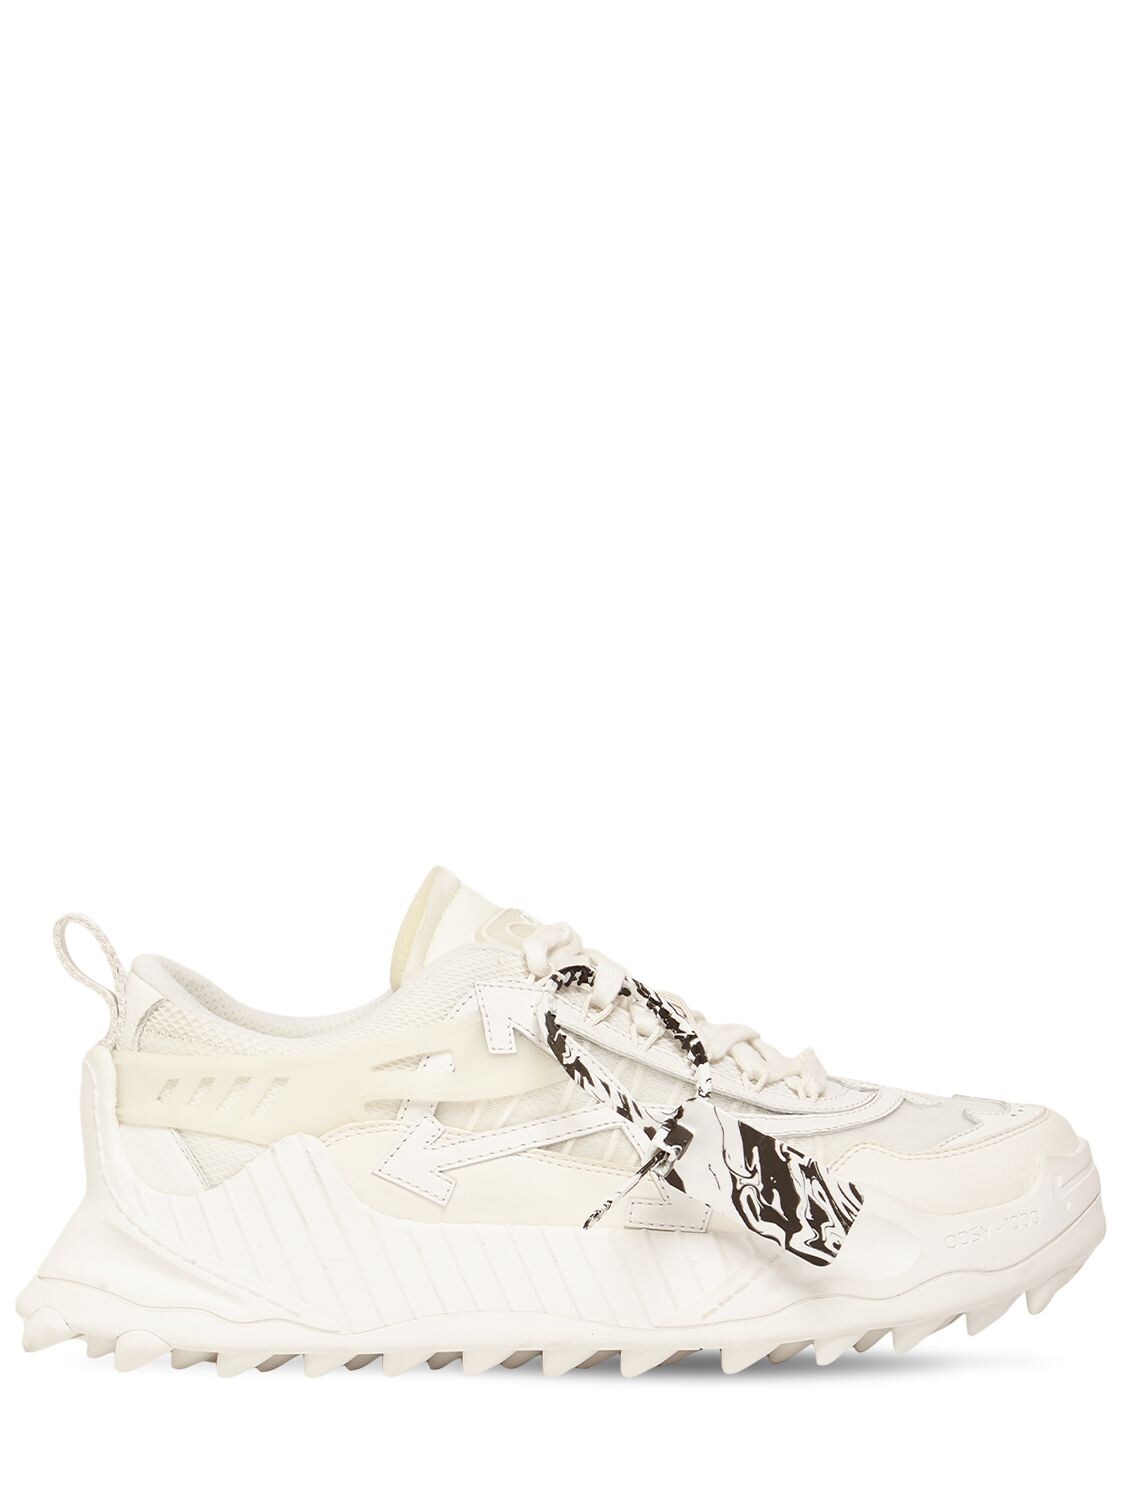 Off-white Odsy-1000 Tech Low Sneakers In White